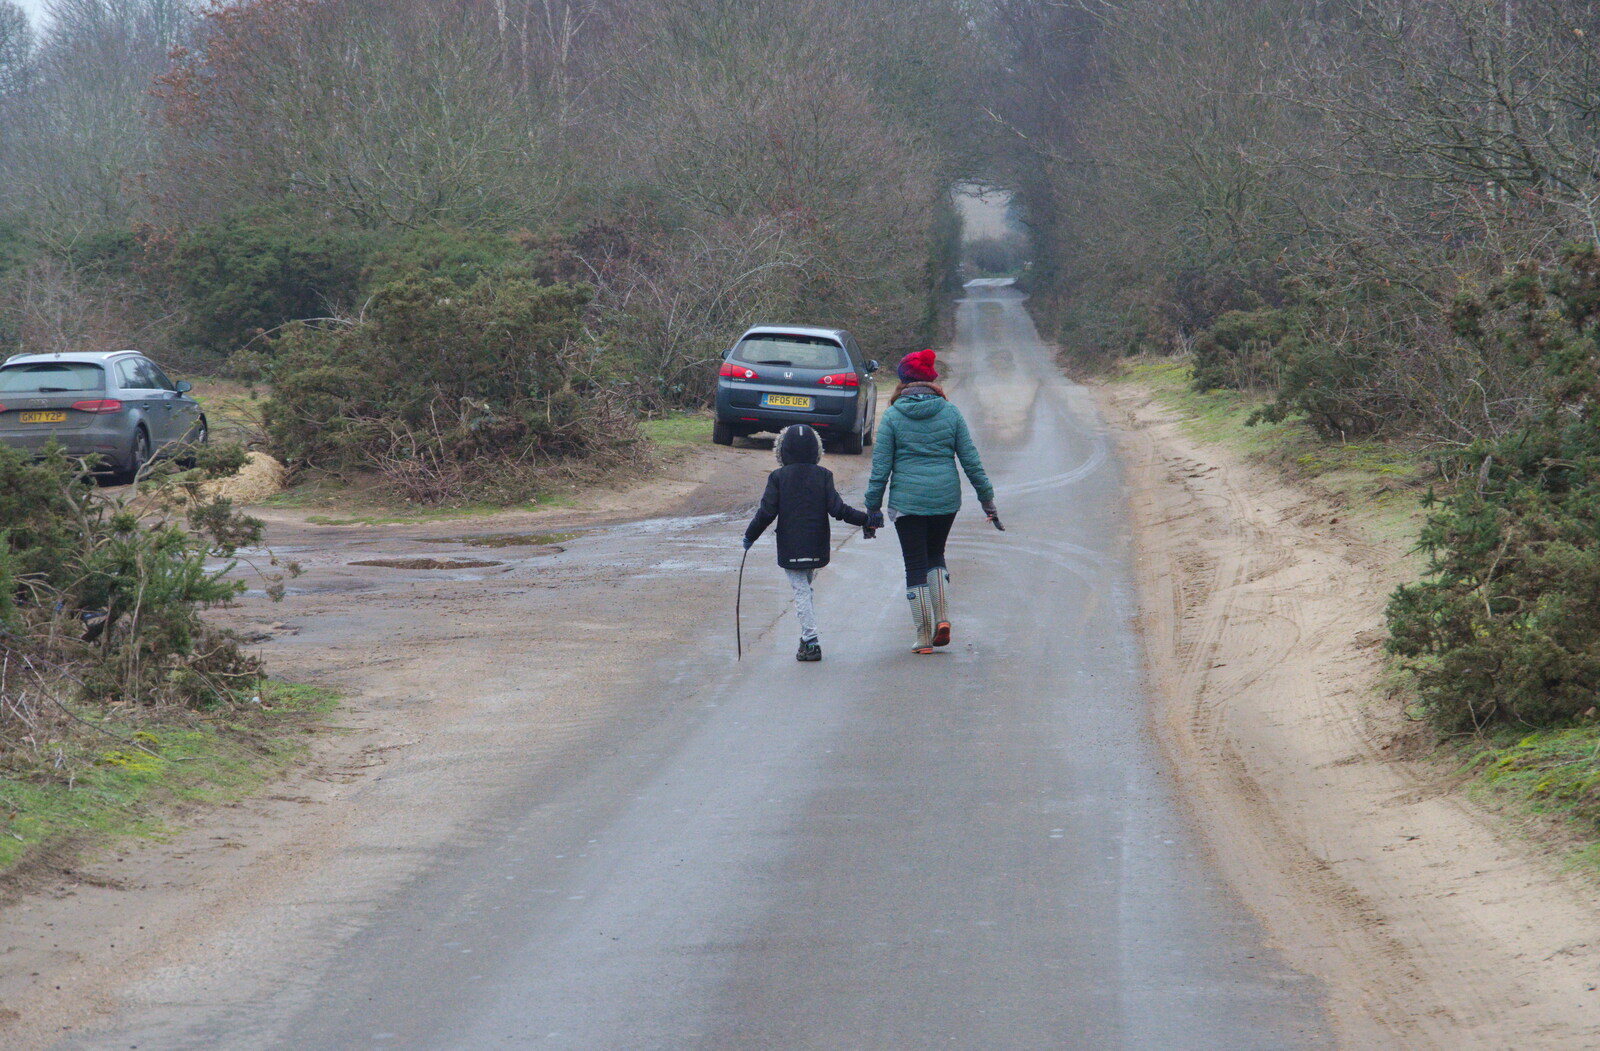 Harry and Isobel wander back to the car from New Year's Day on the Ling, Wortham, Suffolk - 1st January 2020